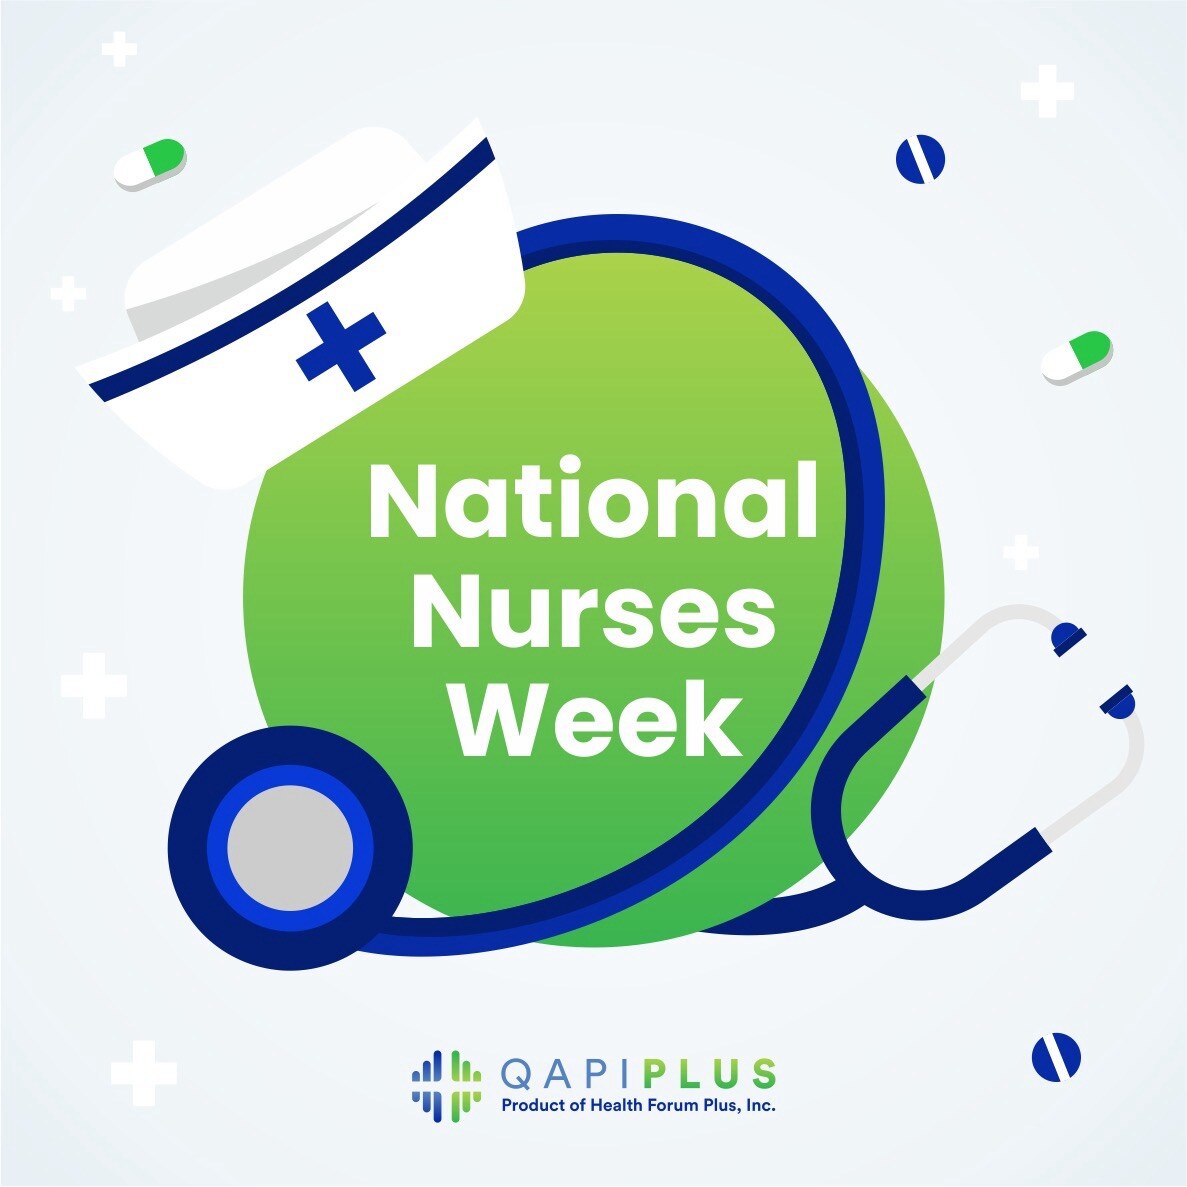 Thank you to all nurses for making a huge difference as you care for, and improve the lives of patients and their families. We admire your spirit of compassion in every healthcare setting, especially #homehealth and #hospice. Happy #NationalNursesWeek!  #NursesLightUpTheSky